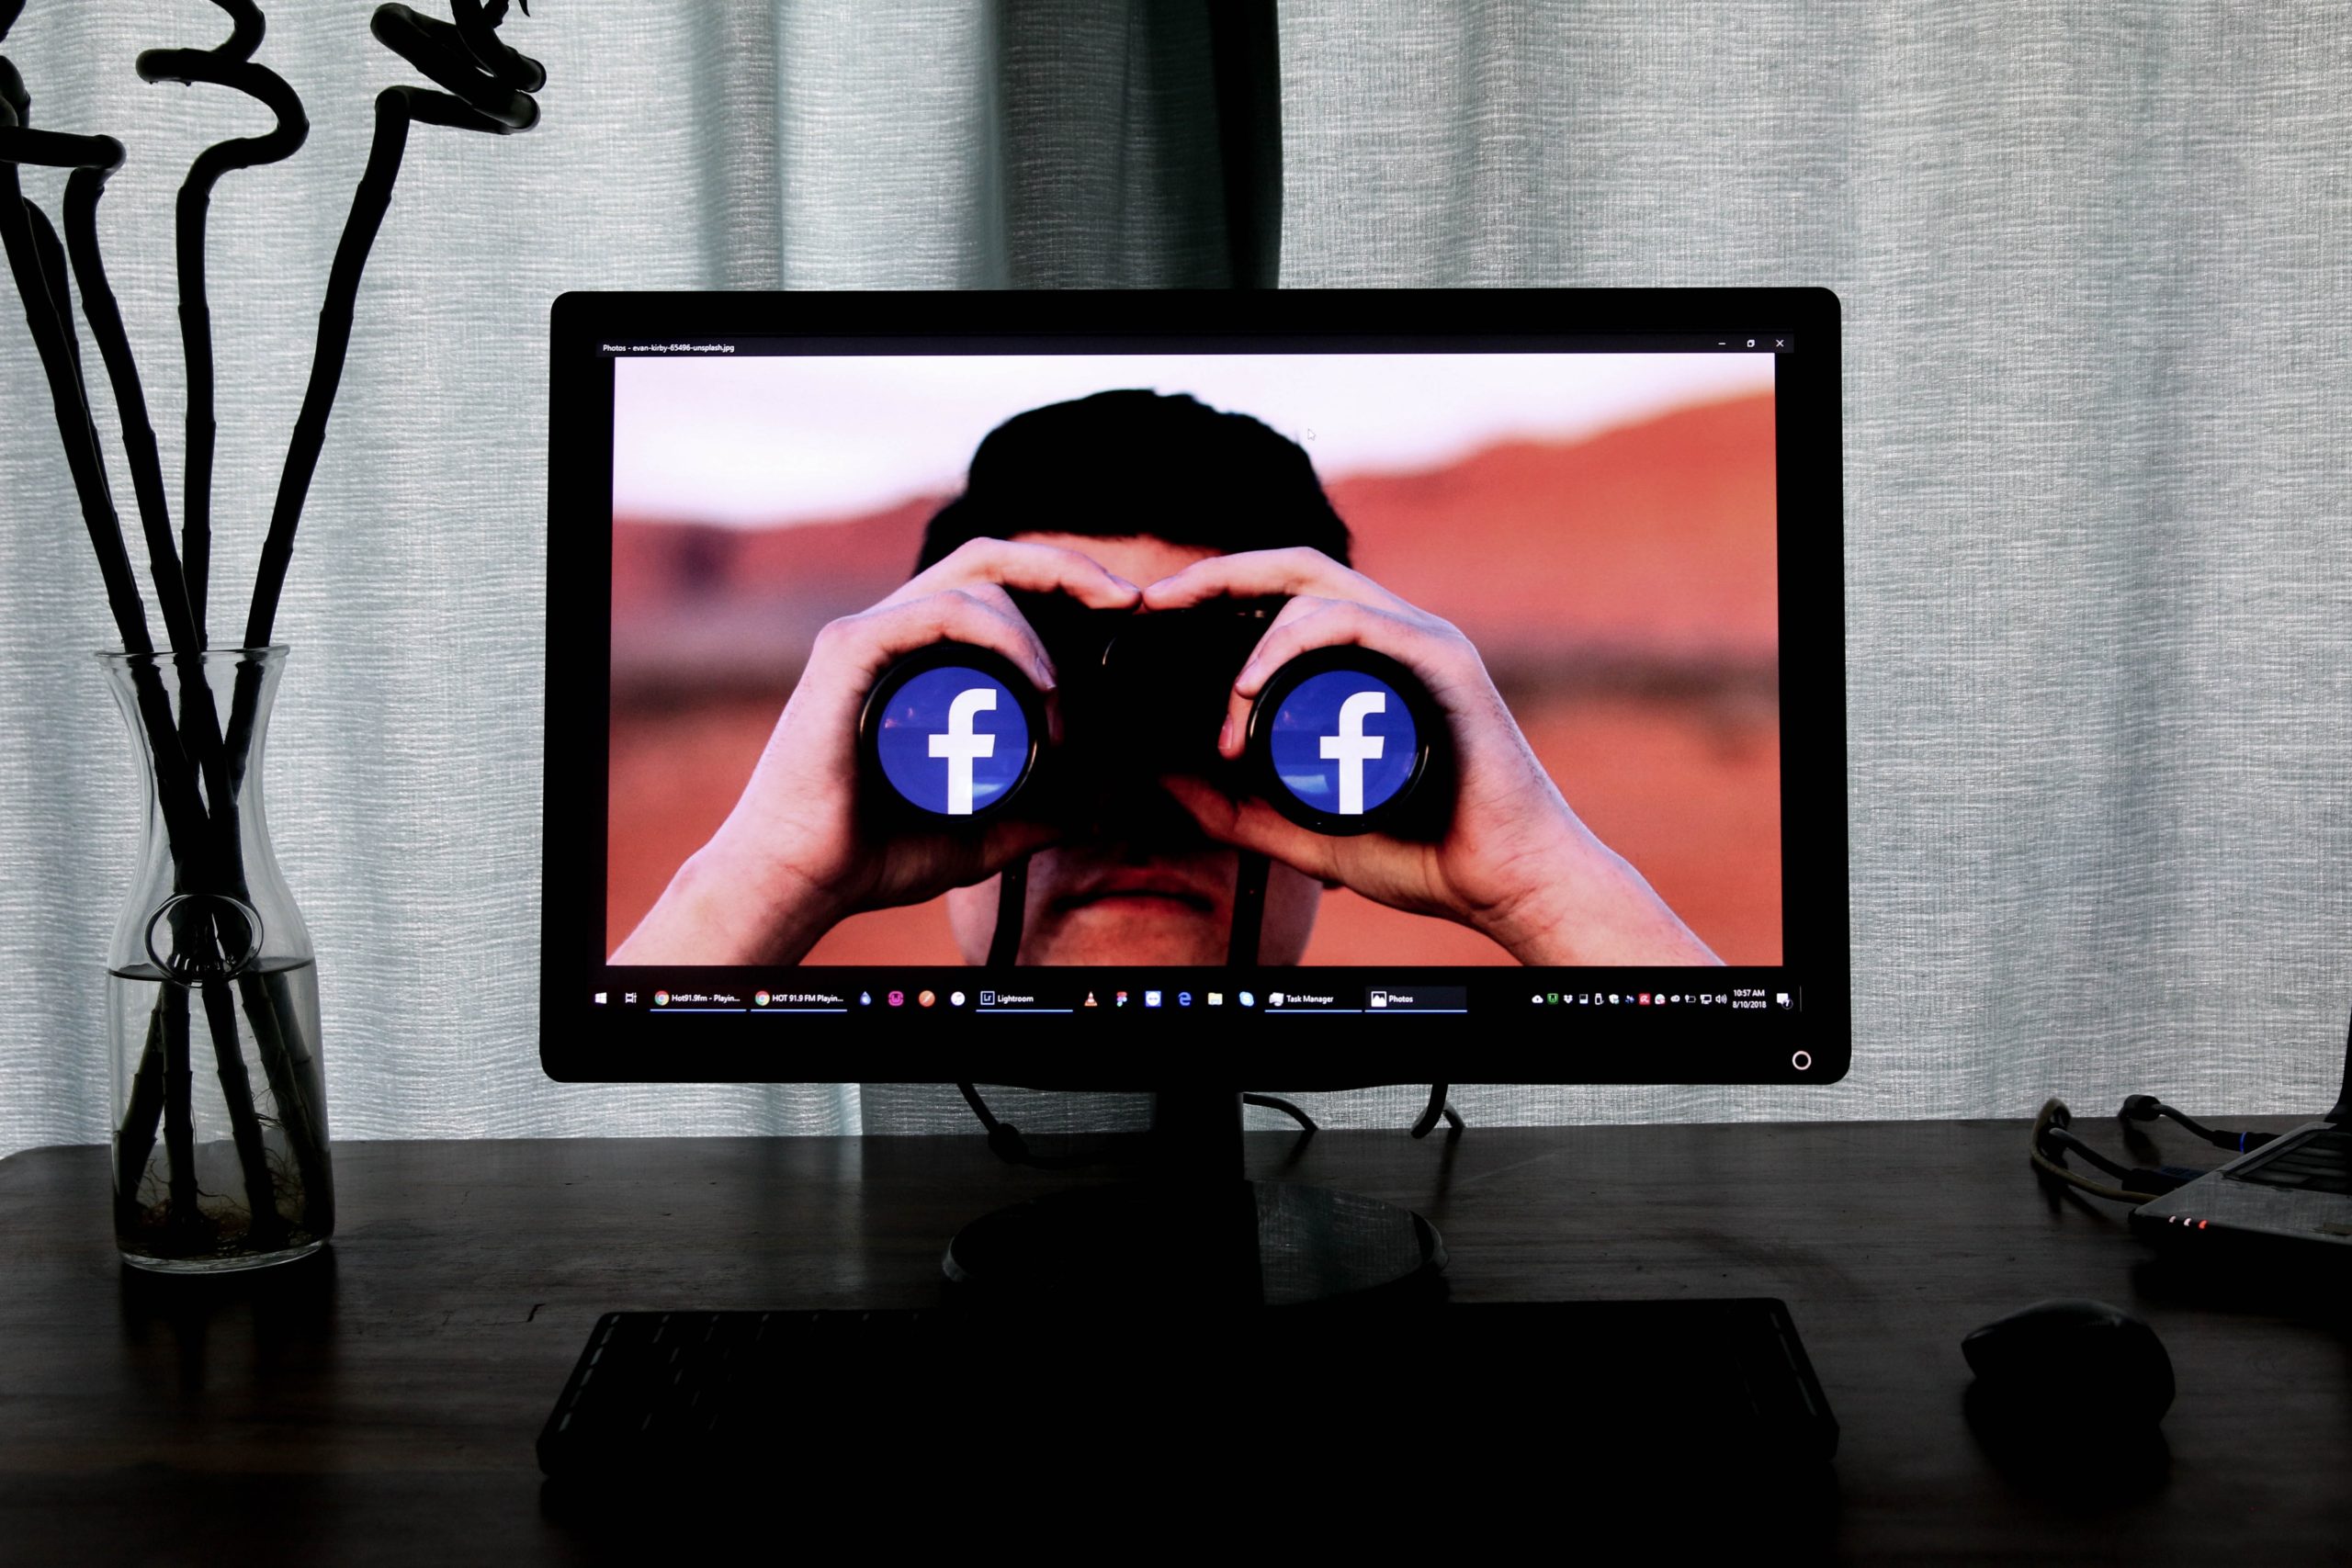 A TV screen shows a person holding binoculars with Facebook logos